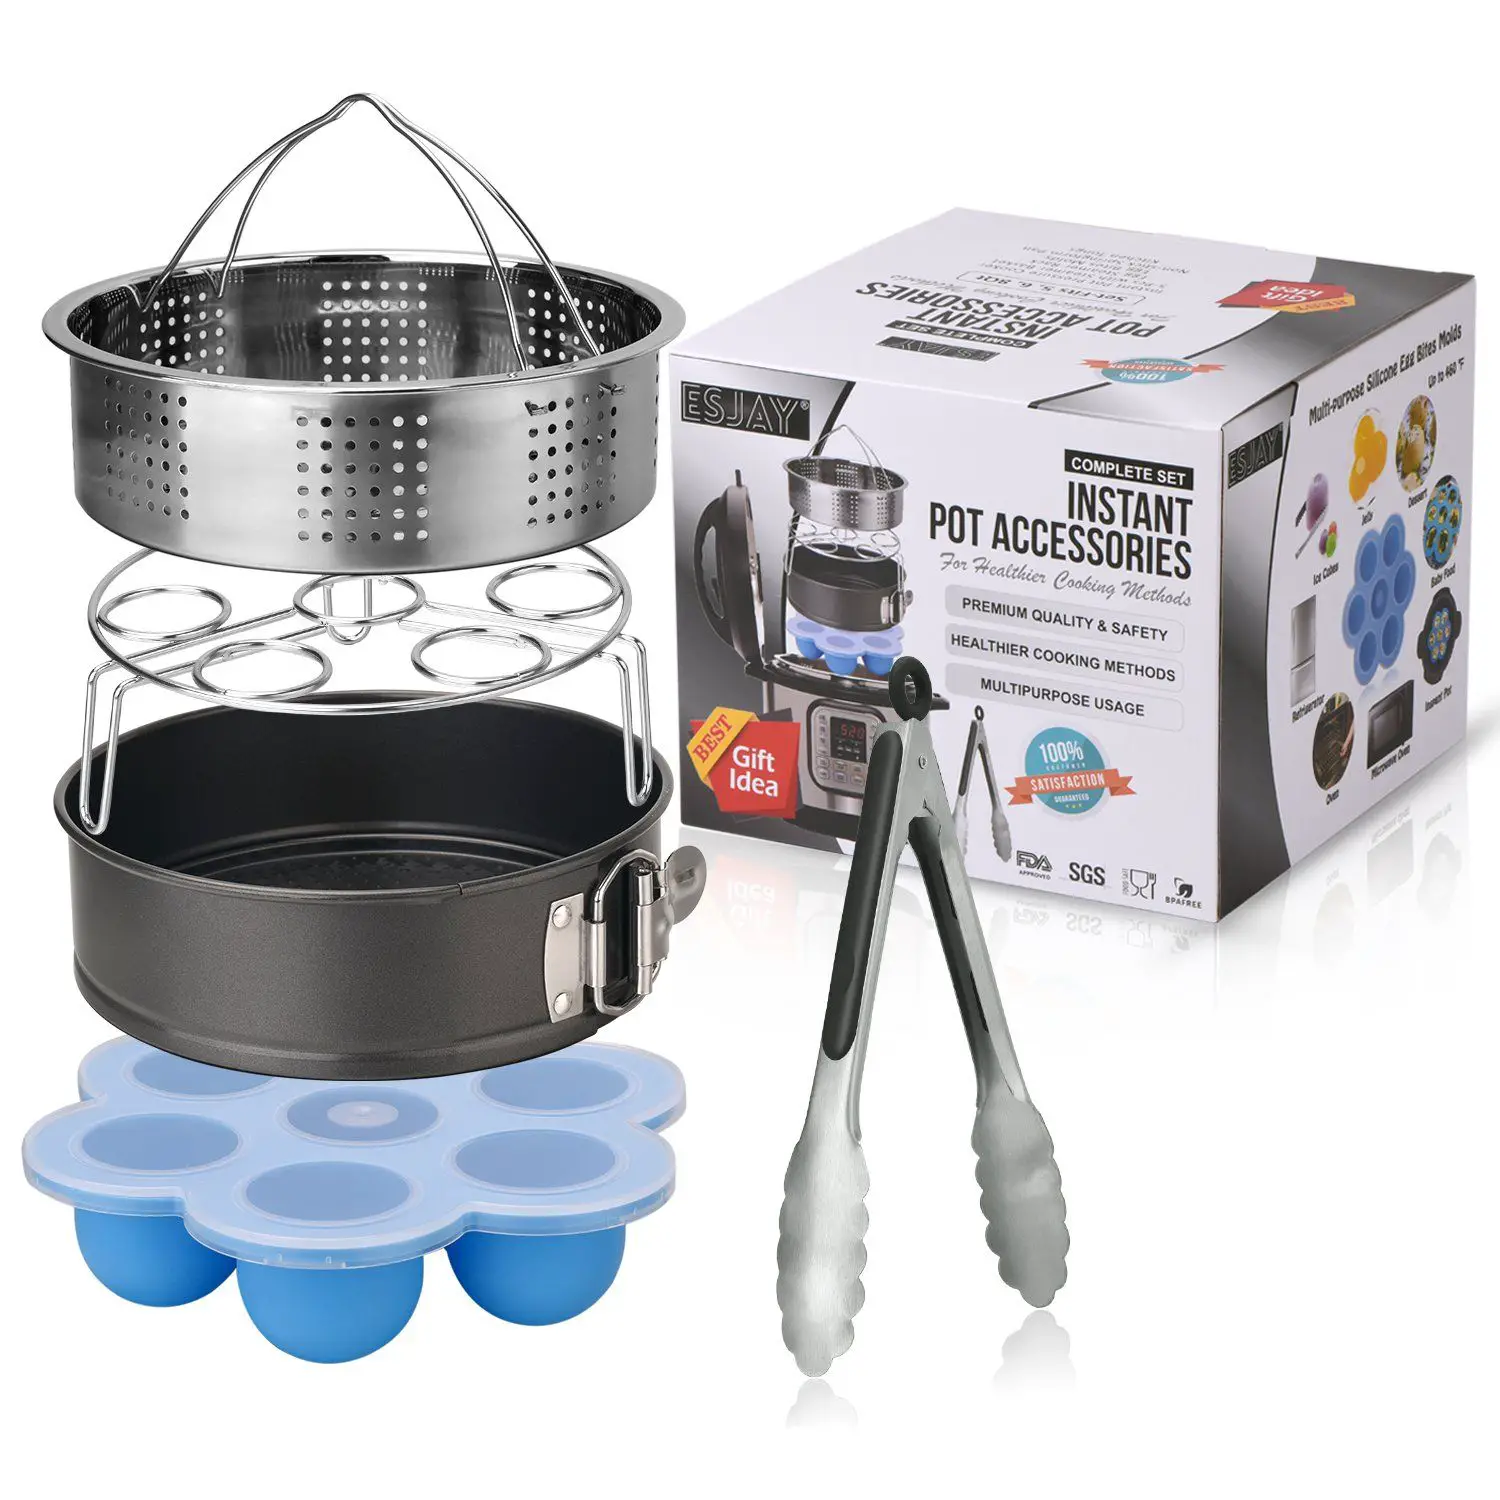 Accessories for your Instant Pots and Pressure Cookers